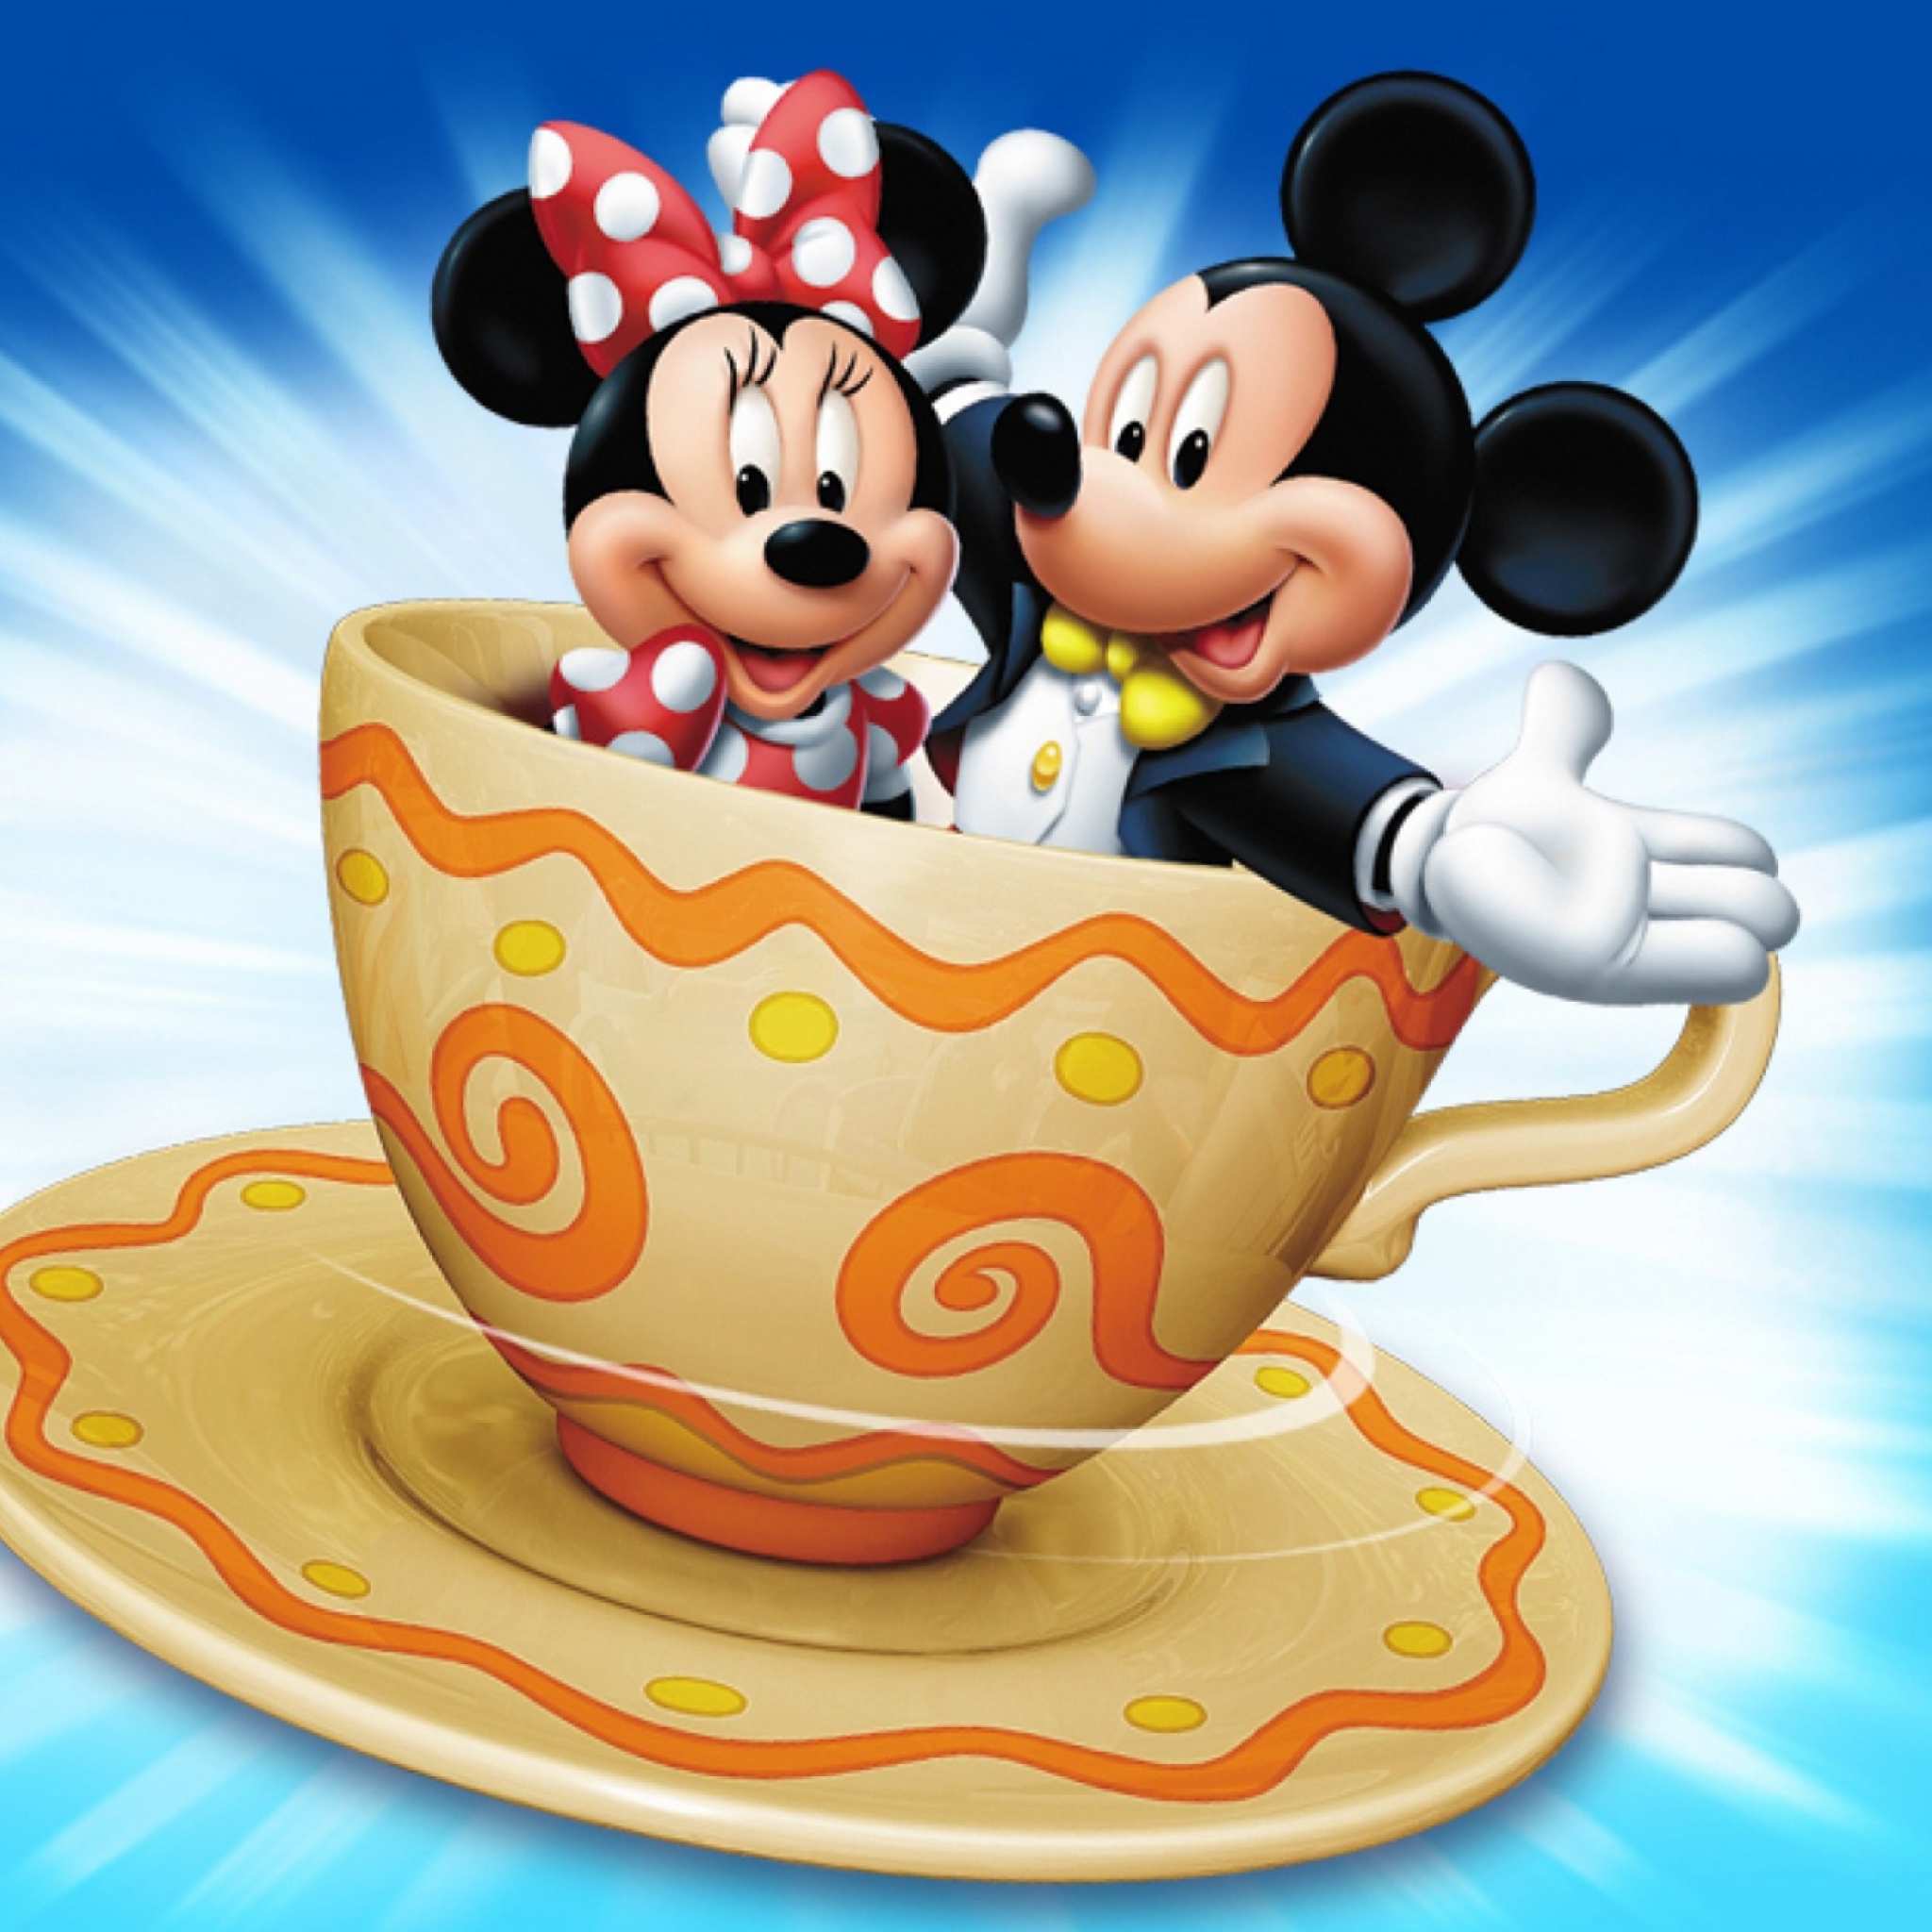 Mickey And Minnie Mouse In Cup screenshot #1 2048x2048